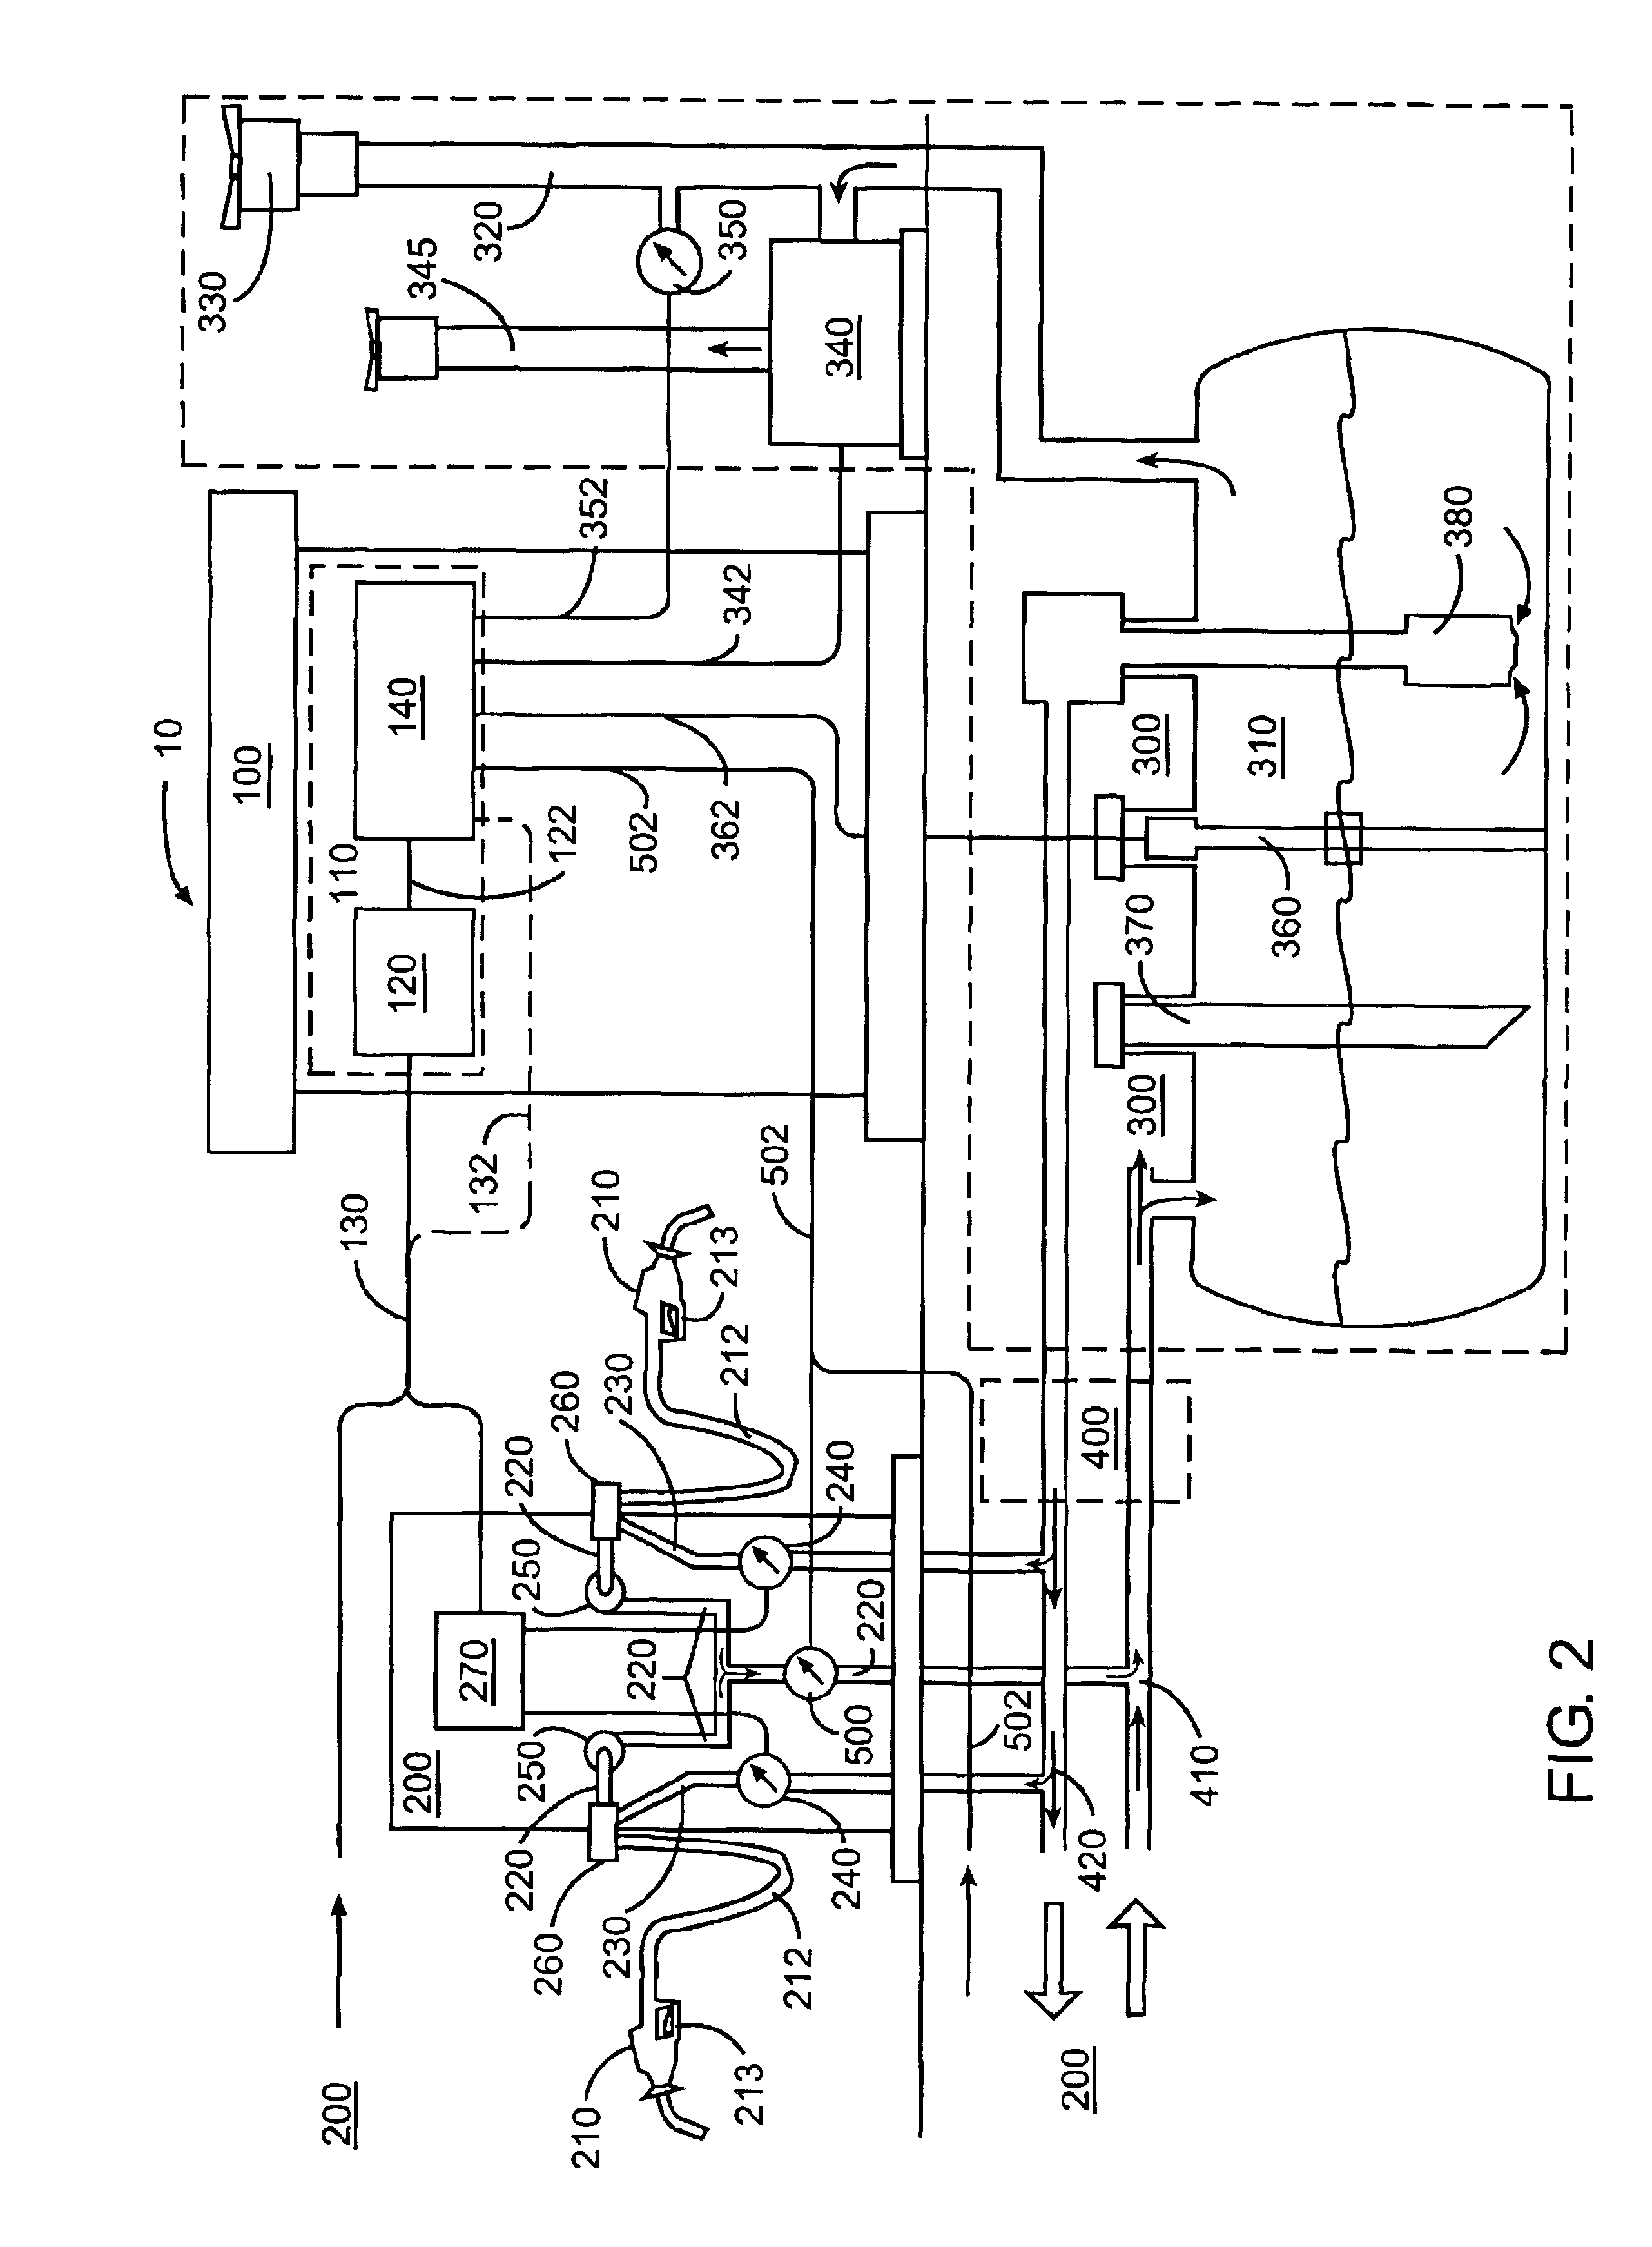 Fueling system vapor recovery and containment leak detection system and method